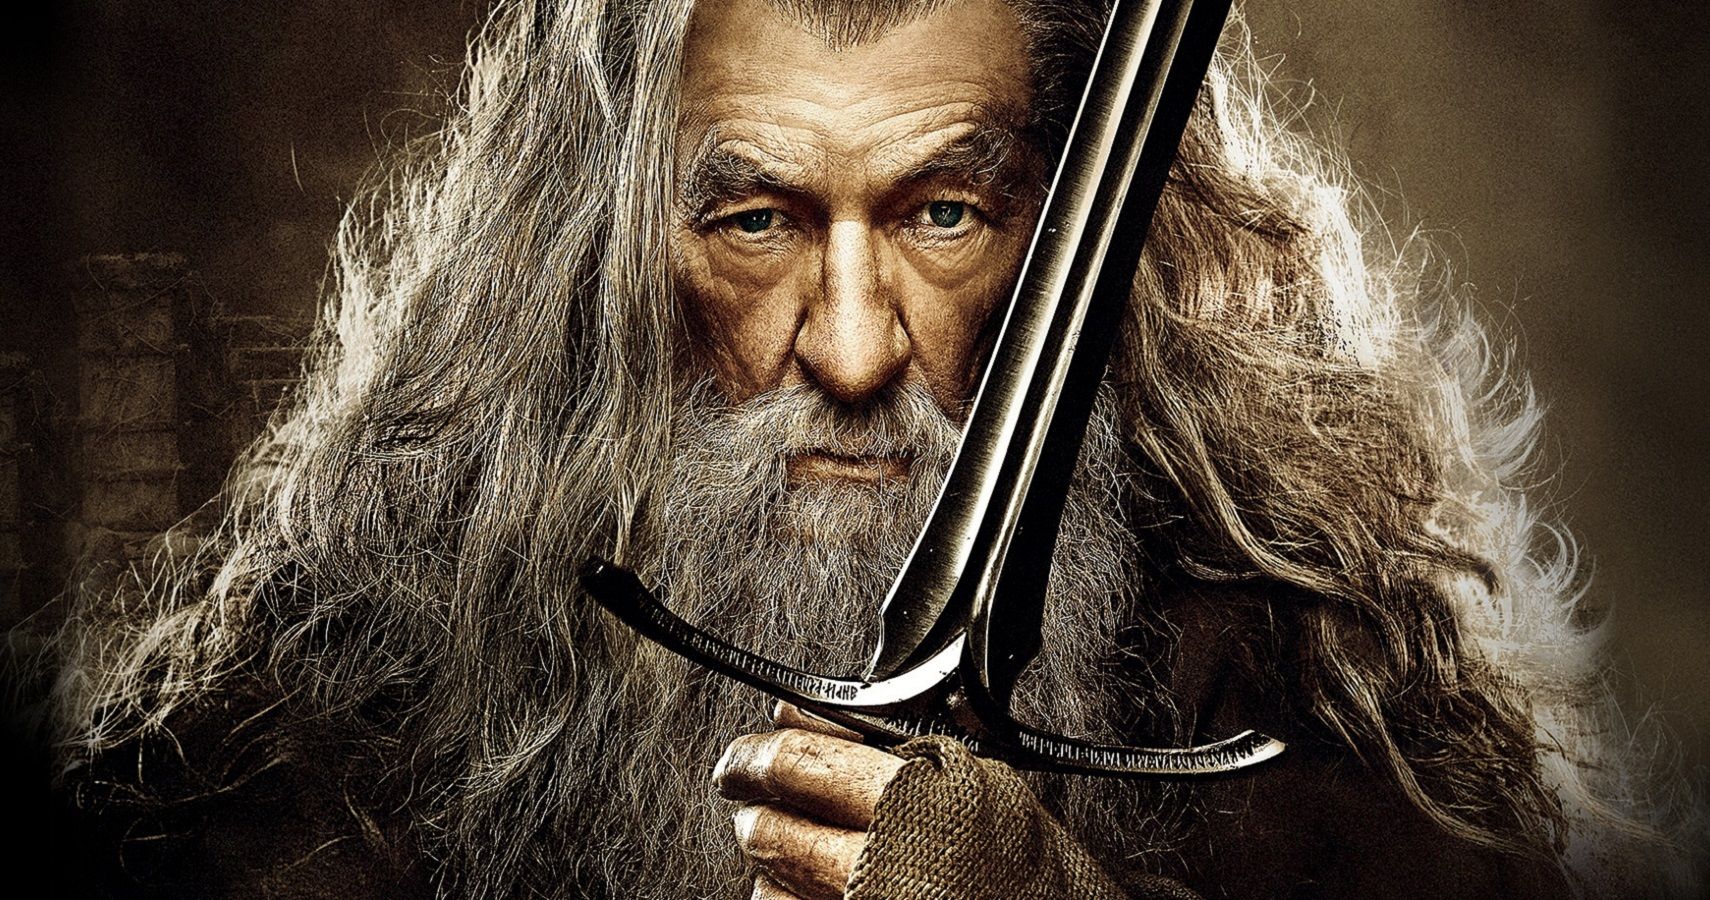 Gandalf with Glamdring from The Hobbit An Unexpected Journey